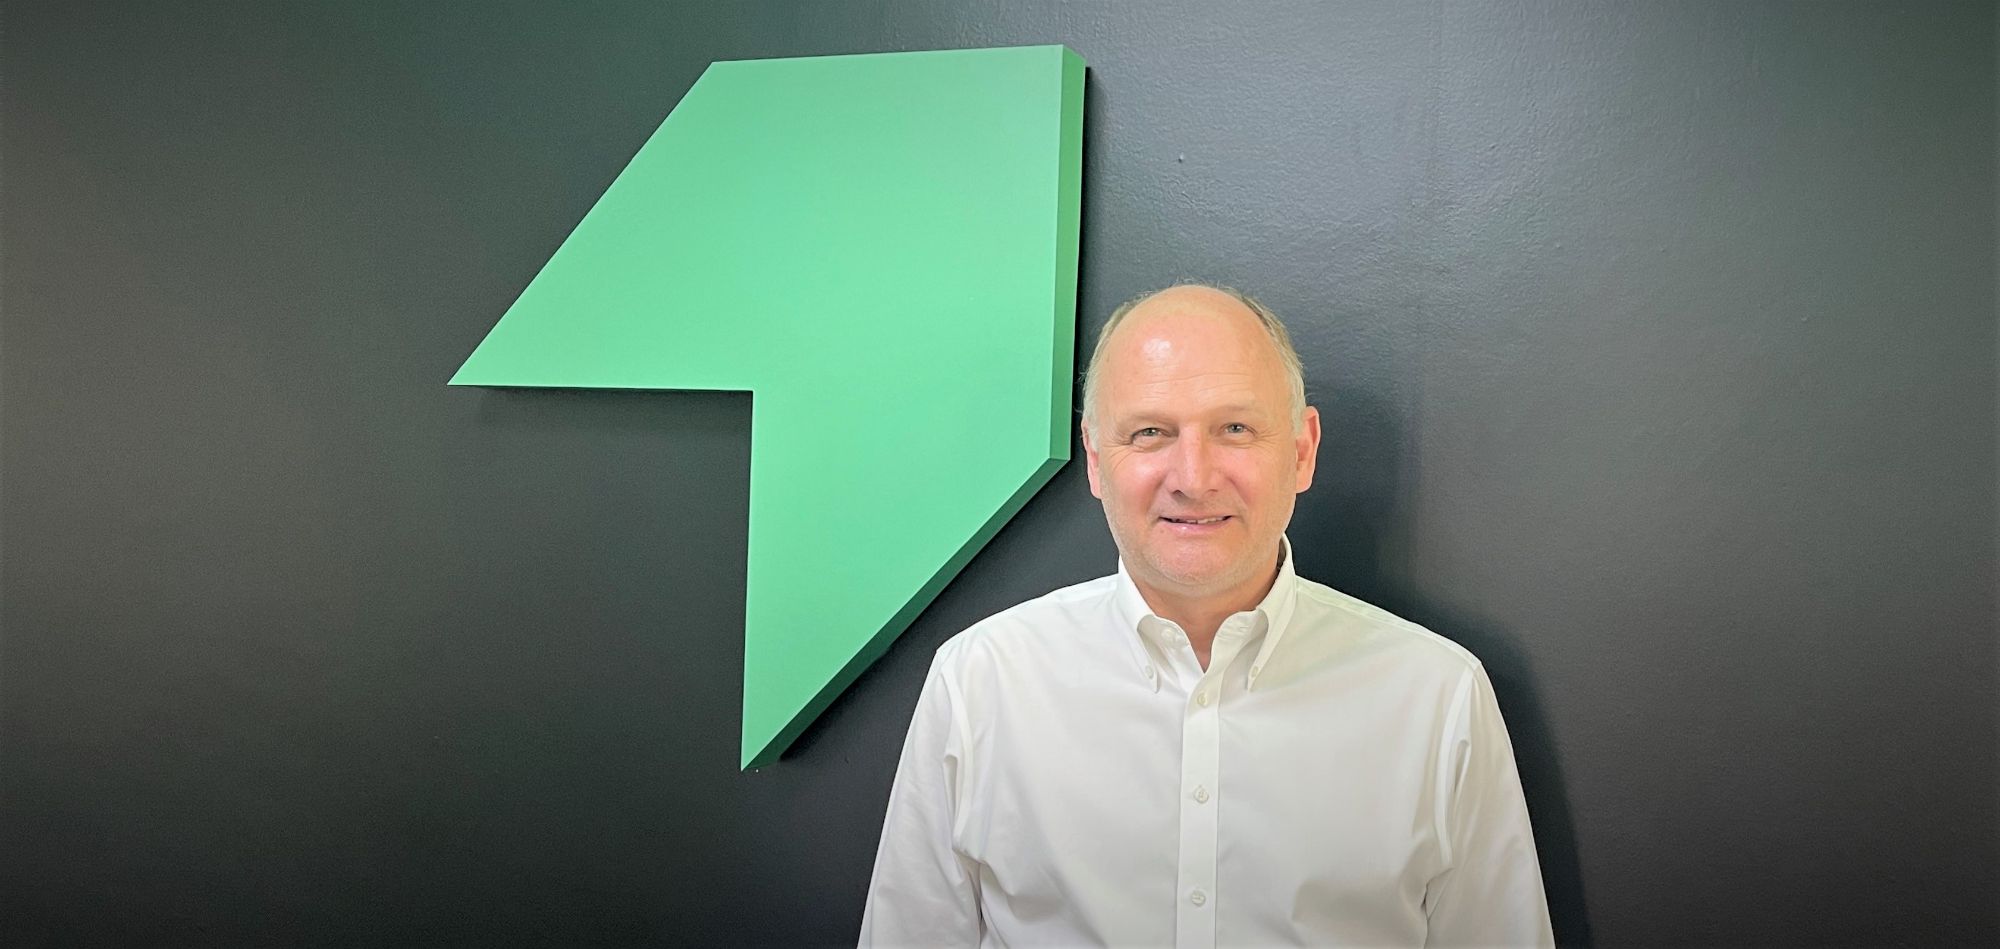 ecube announce David Ladd as new Chief Financial Officer